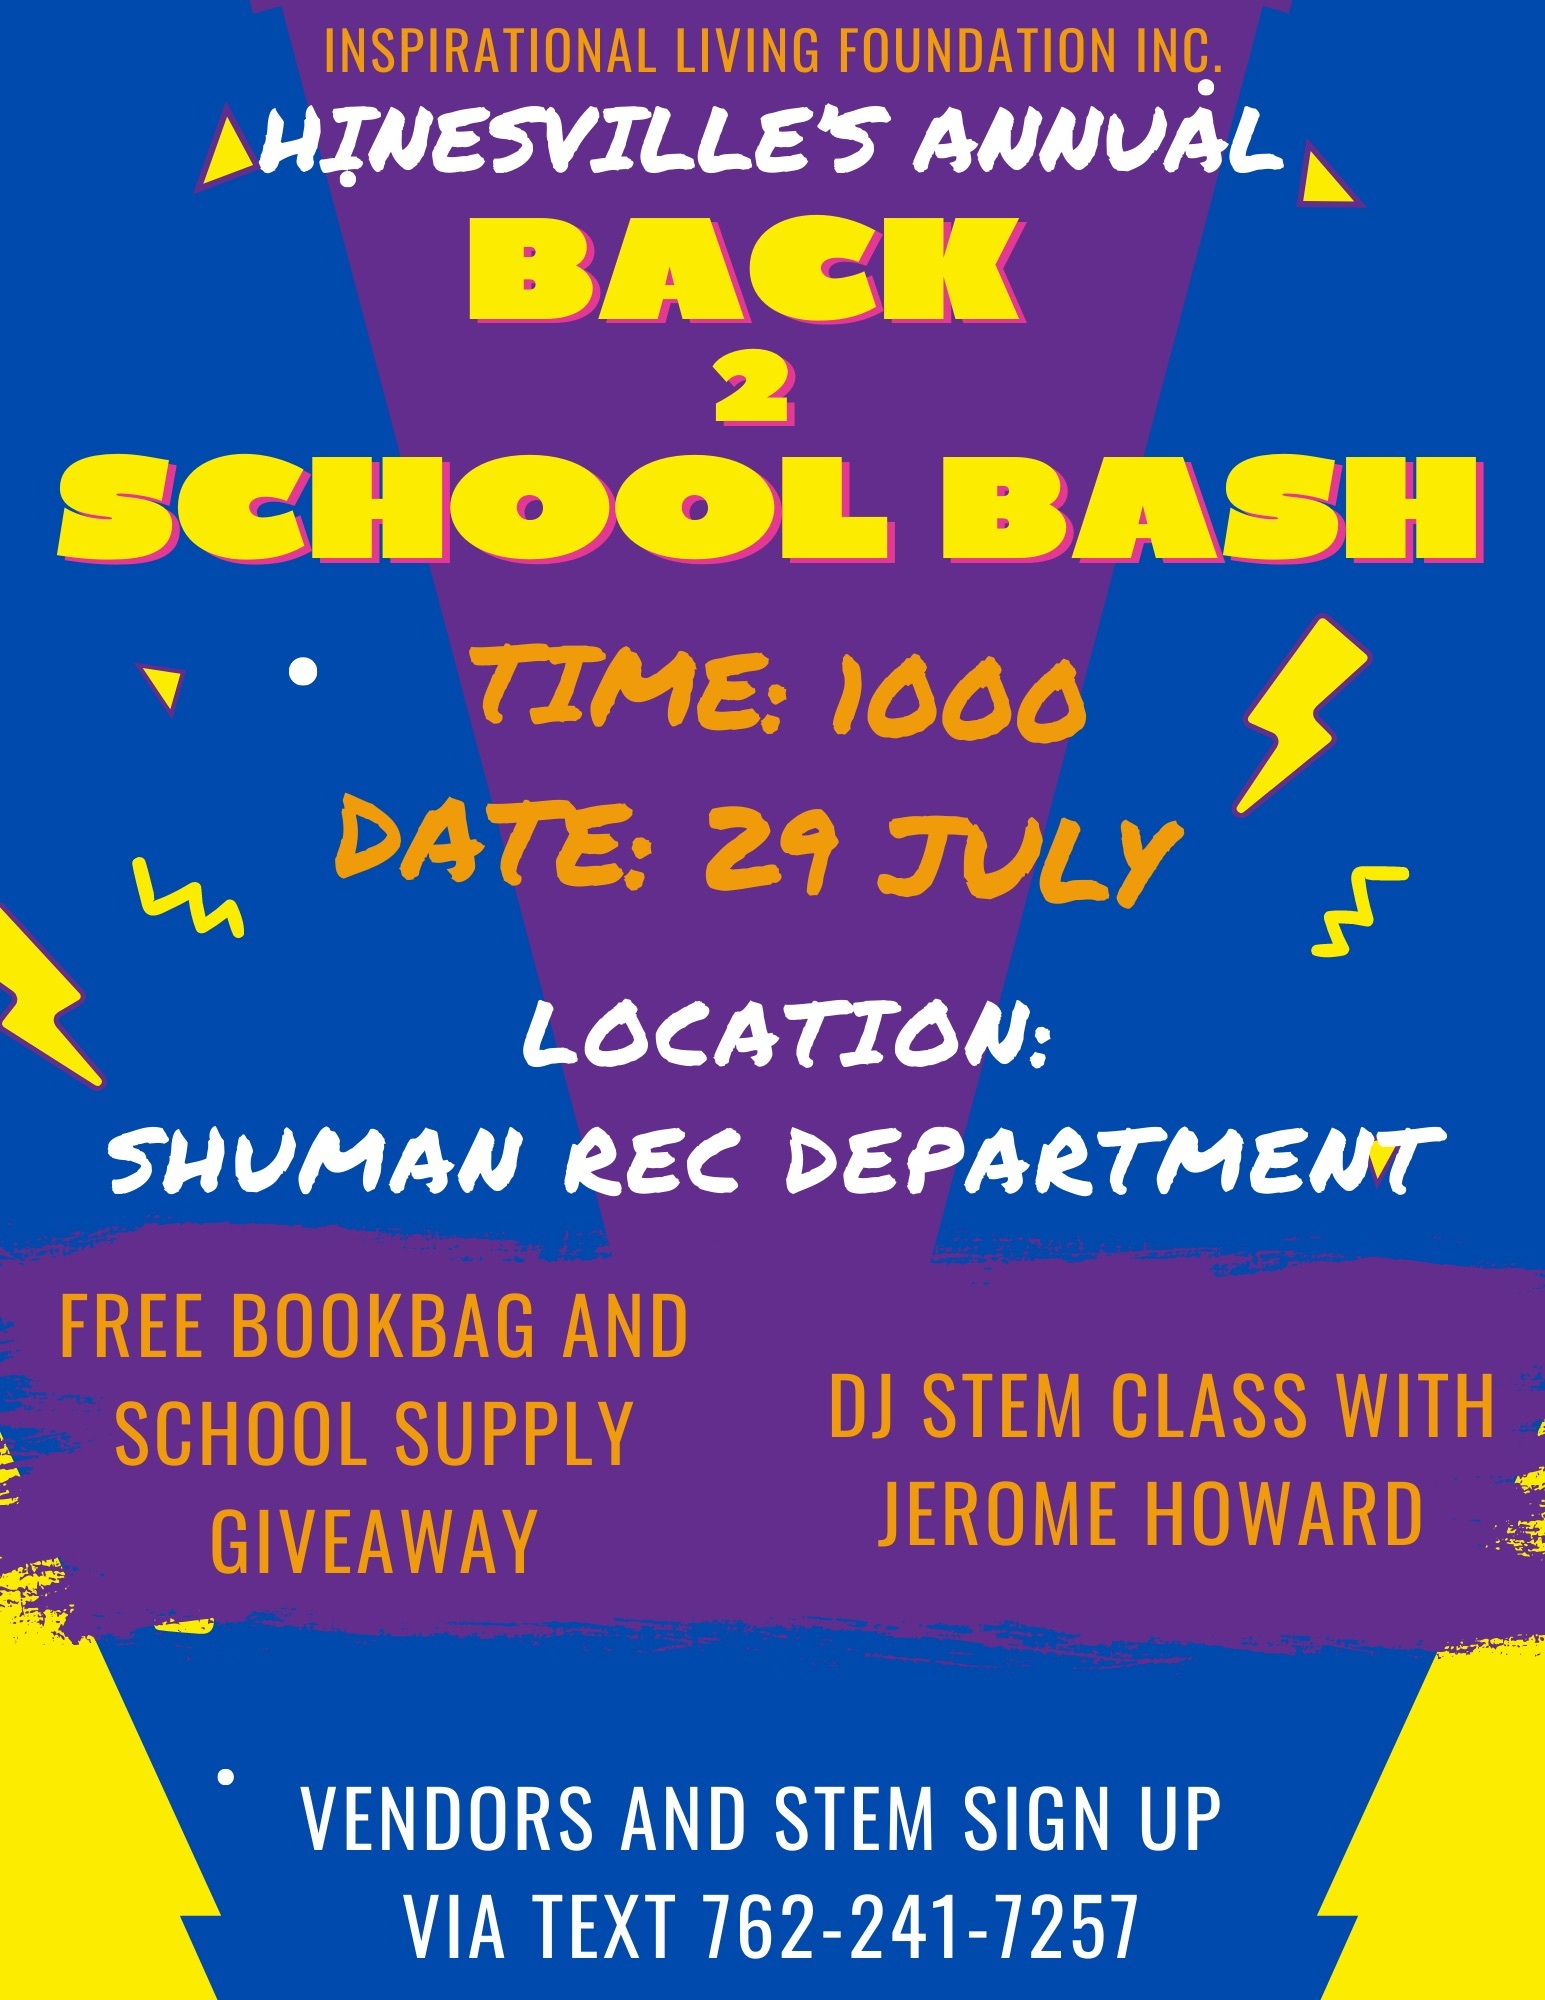 Hinesville's Annual Back to School Bash flyer